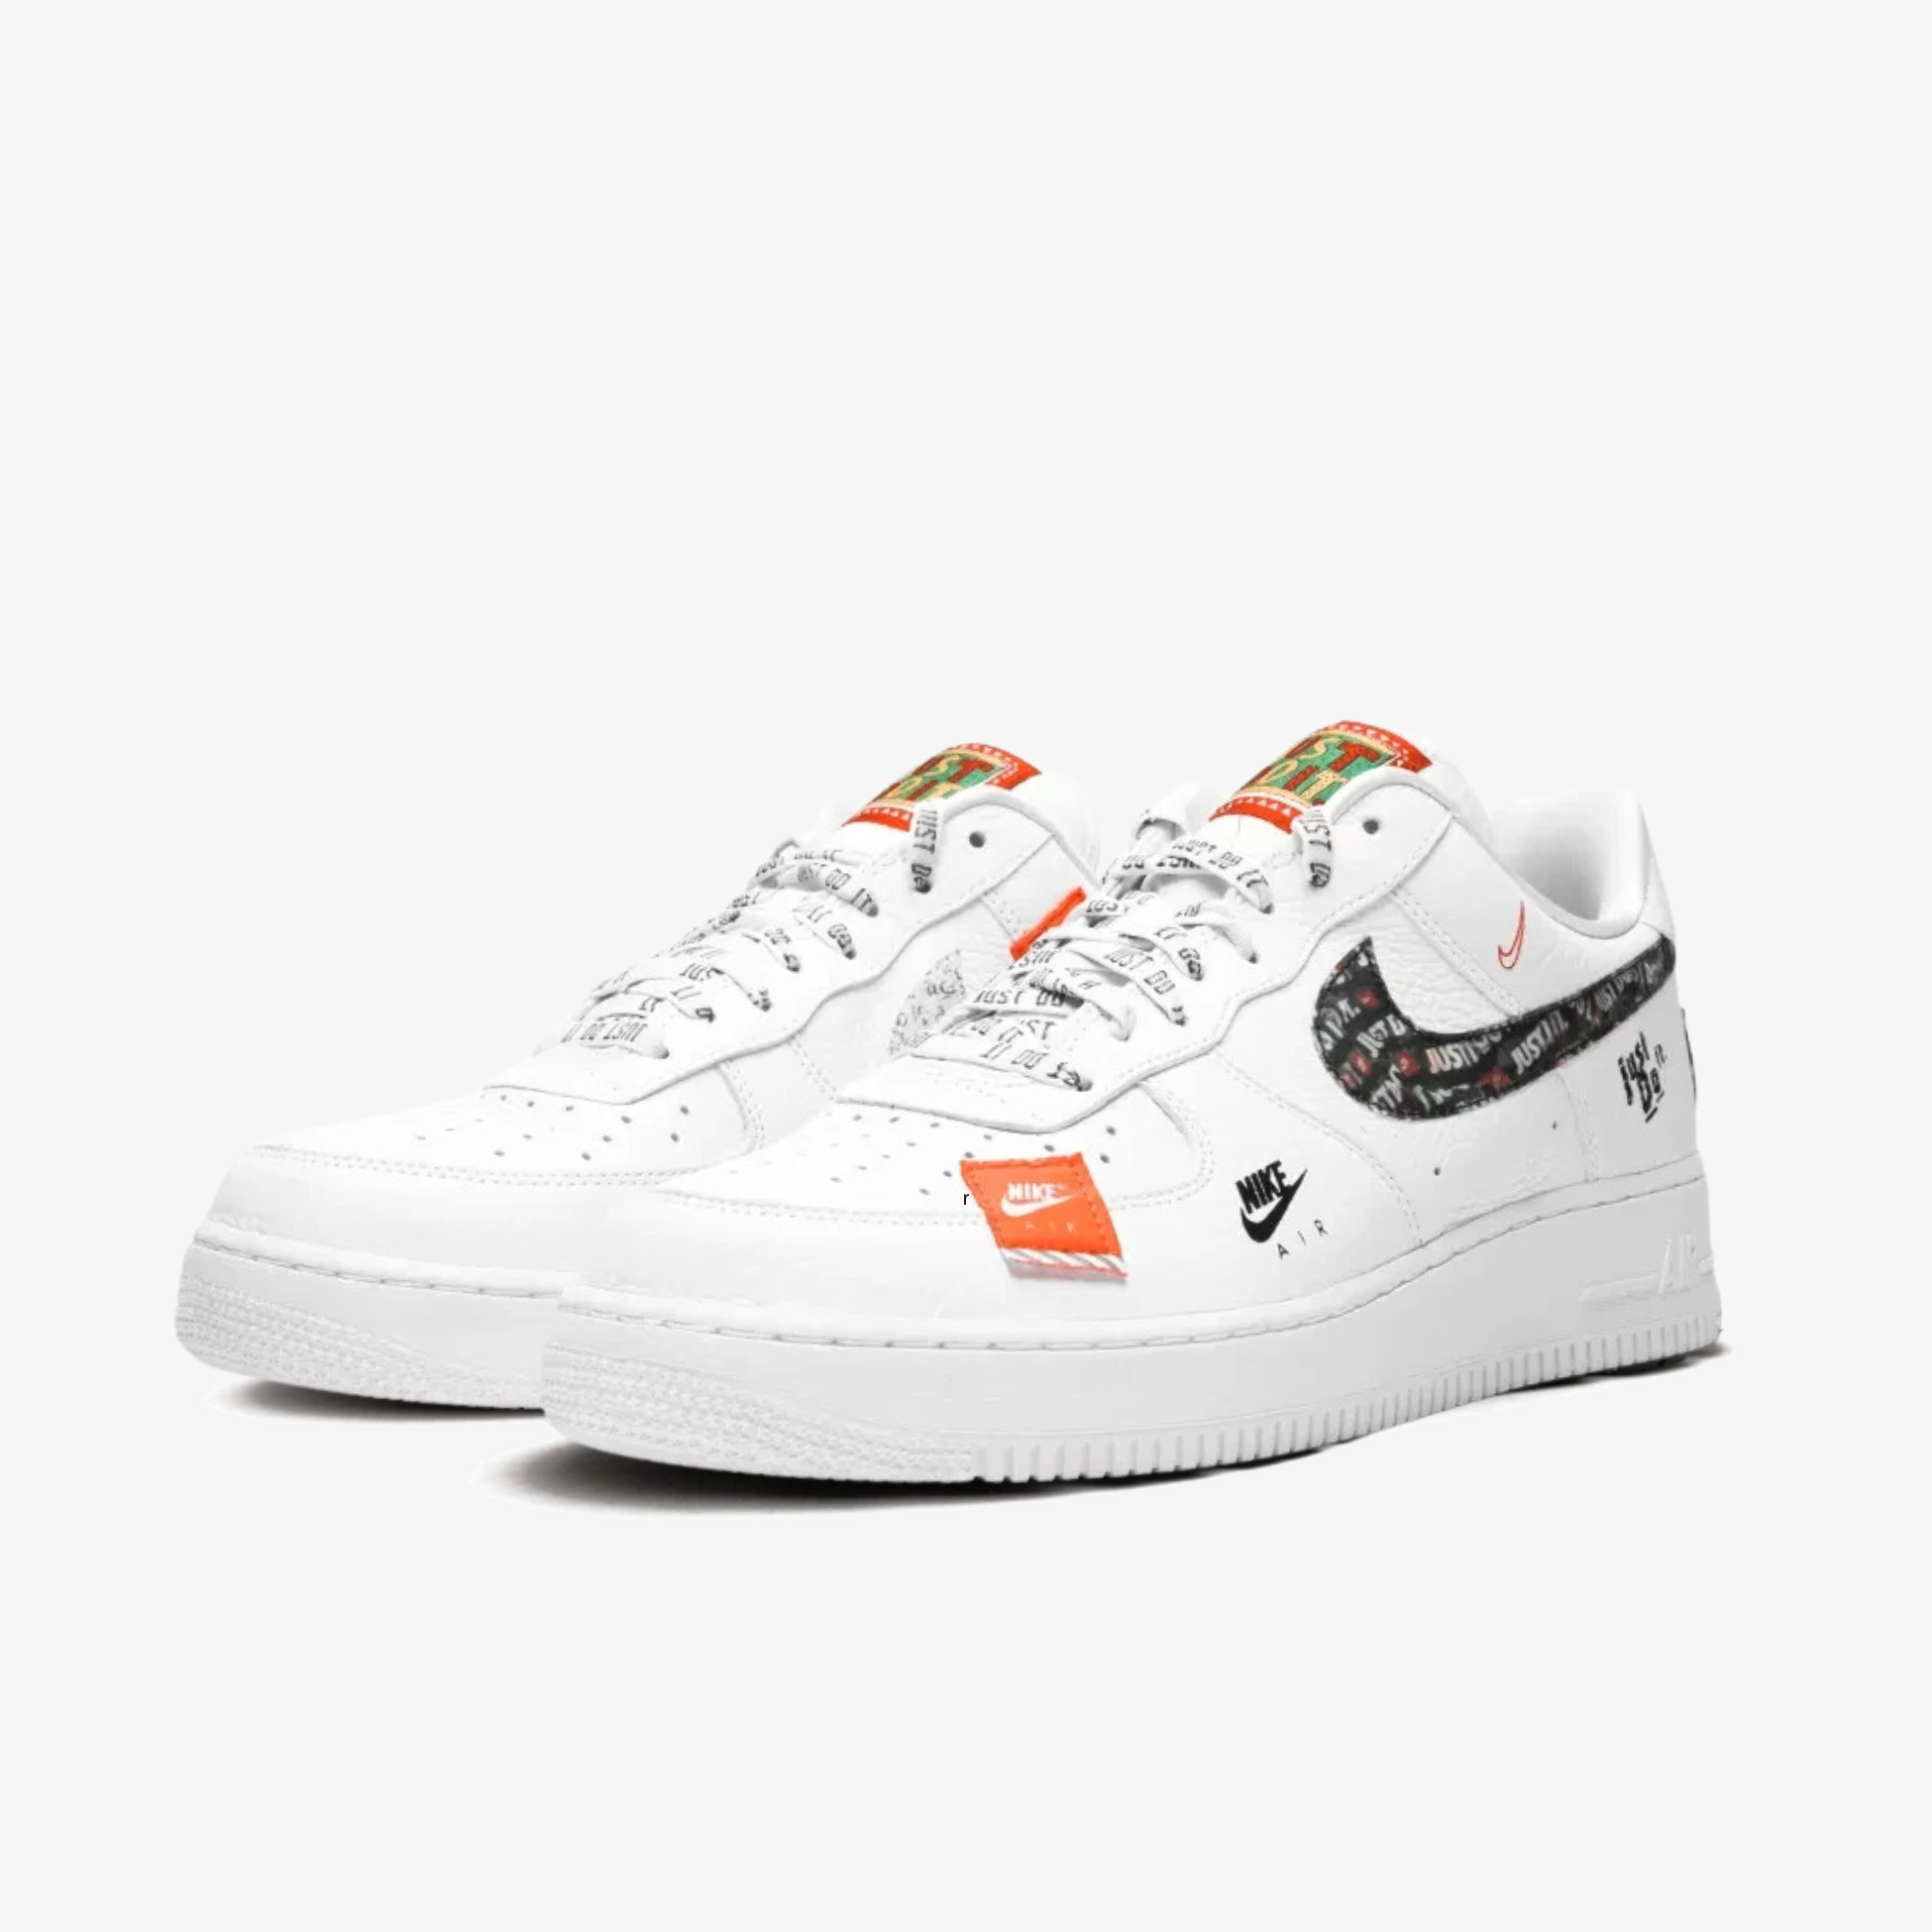 Nike Air Force 1 '07 PRM "Just Do It" Blanco